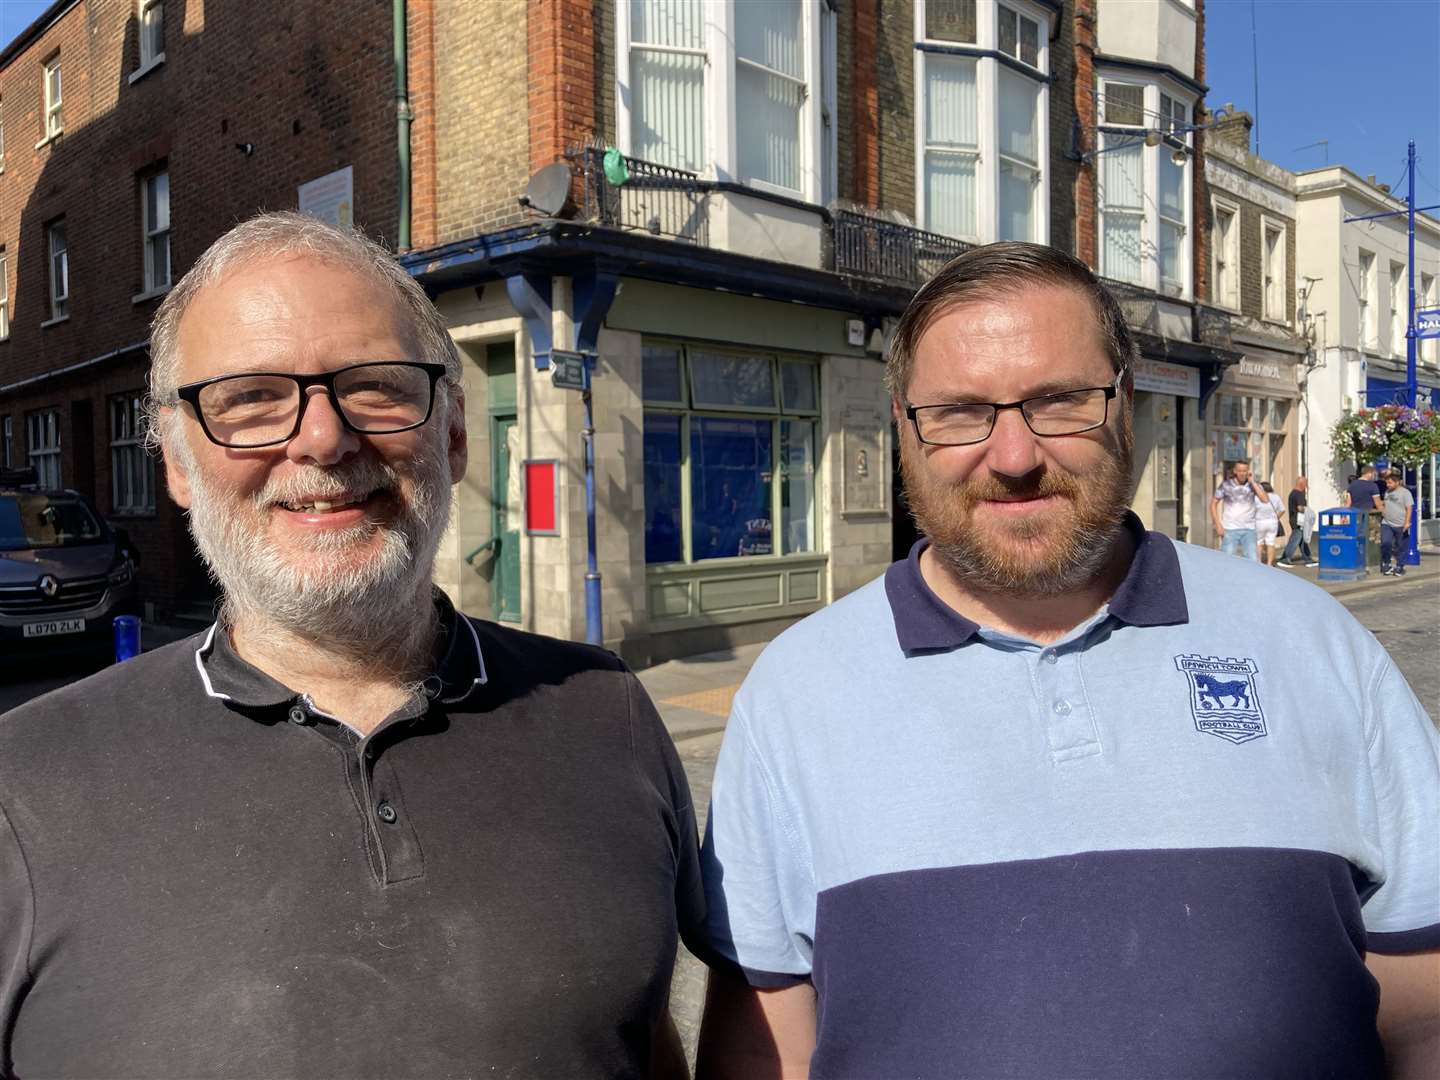 John Durtnall and Cllr Lee McCall launched Durtnall's Restaurant together in Sheerness. John has since left and the restaurant is now named Carlyle's after Lee McCall's grandfather (62028585)